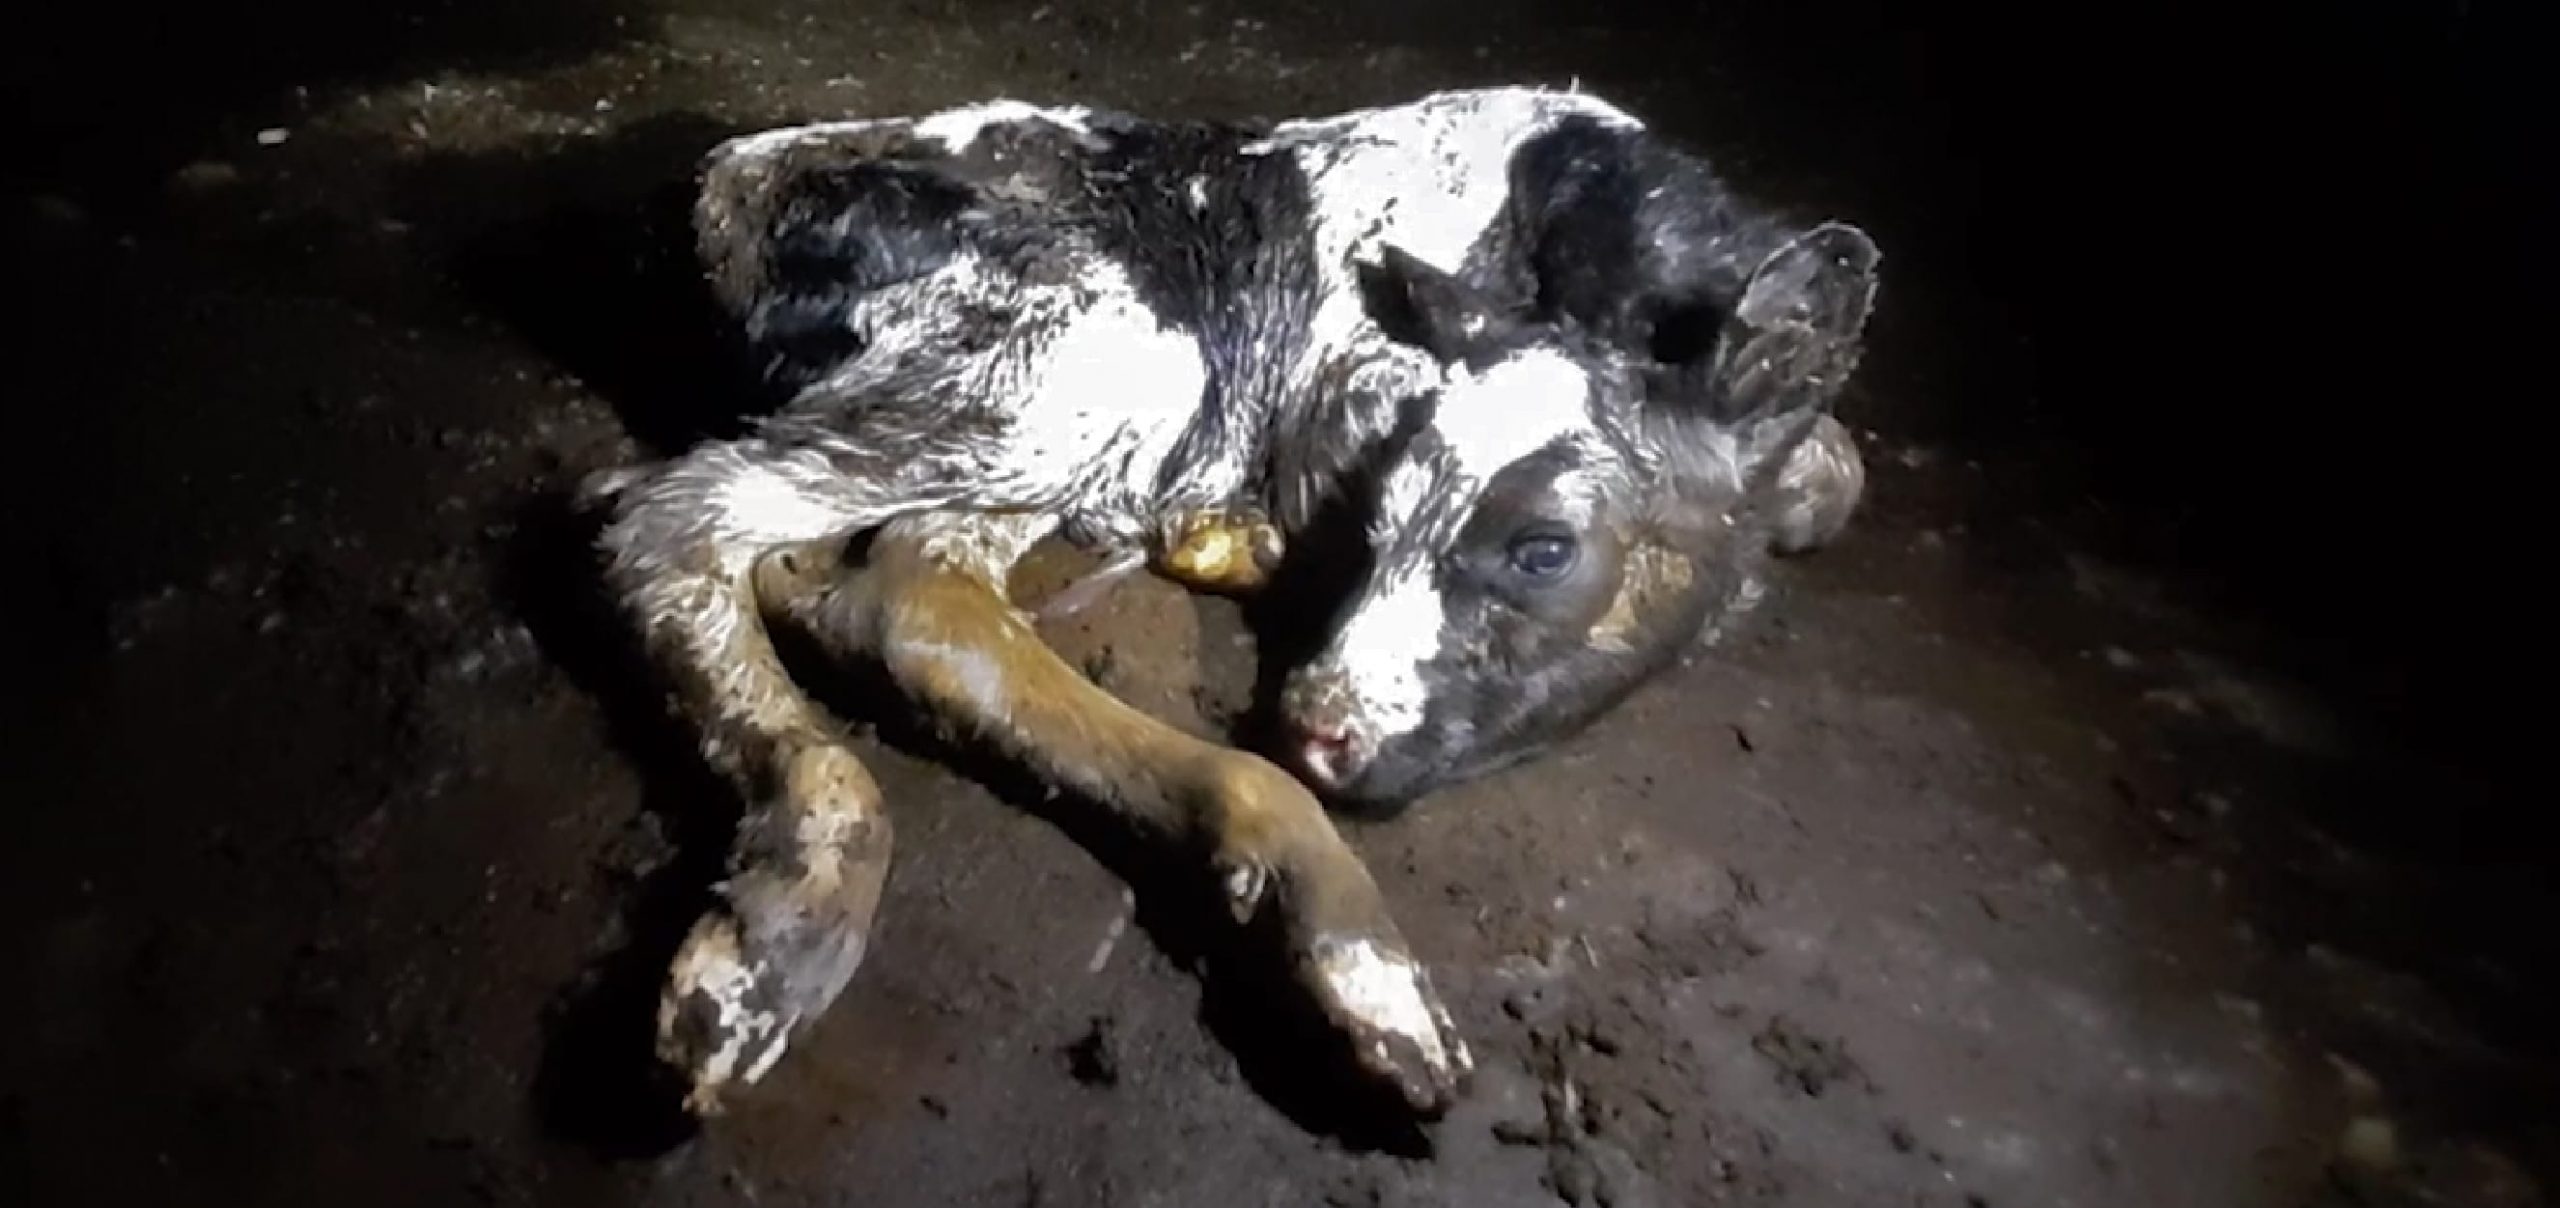 Tell Canada to End Dairy Farm Cruelty